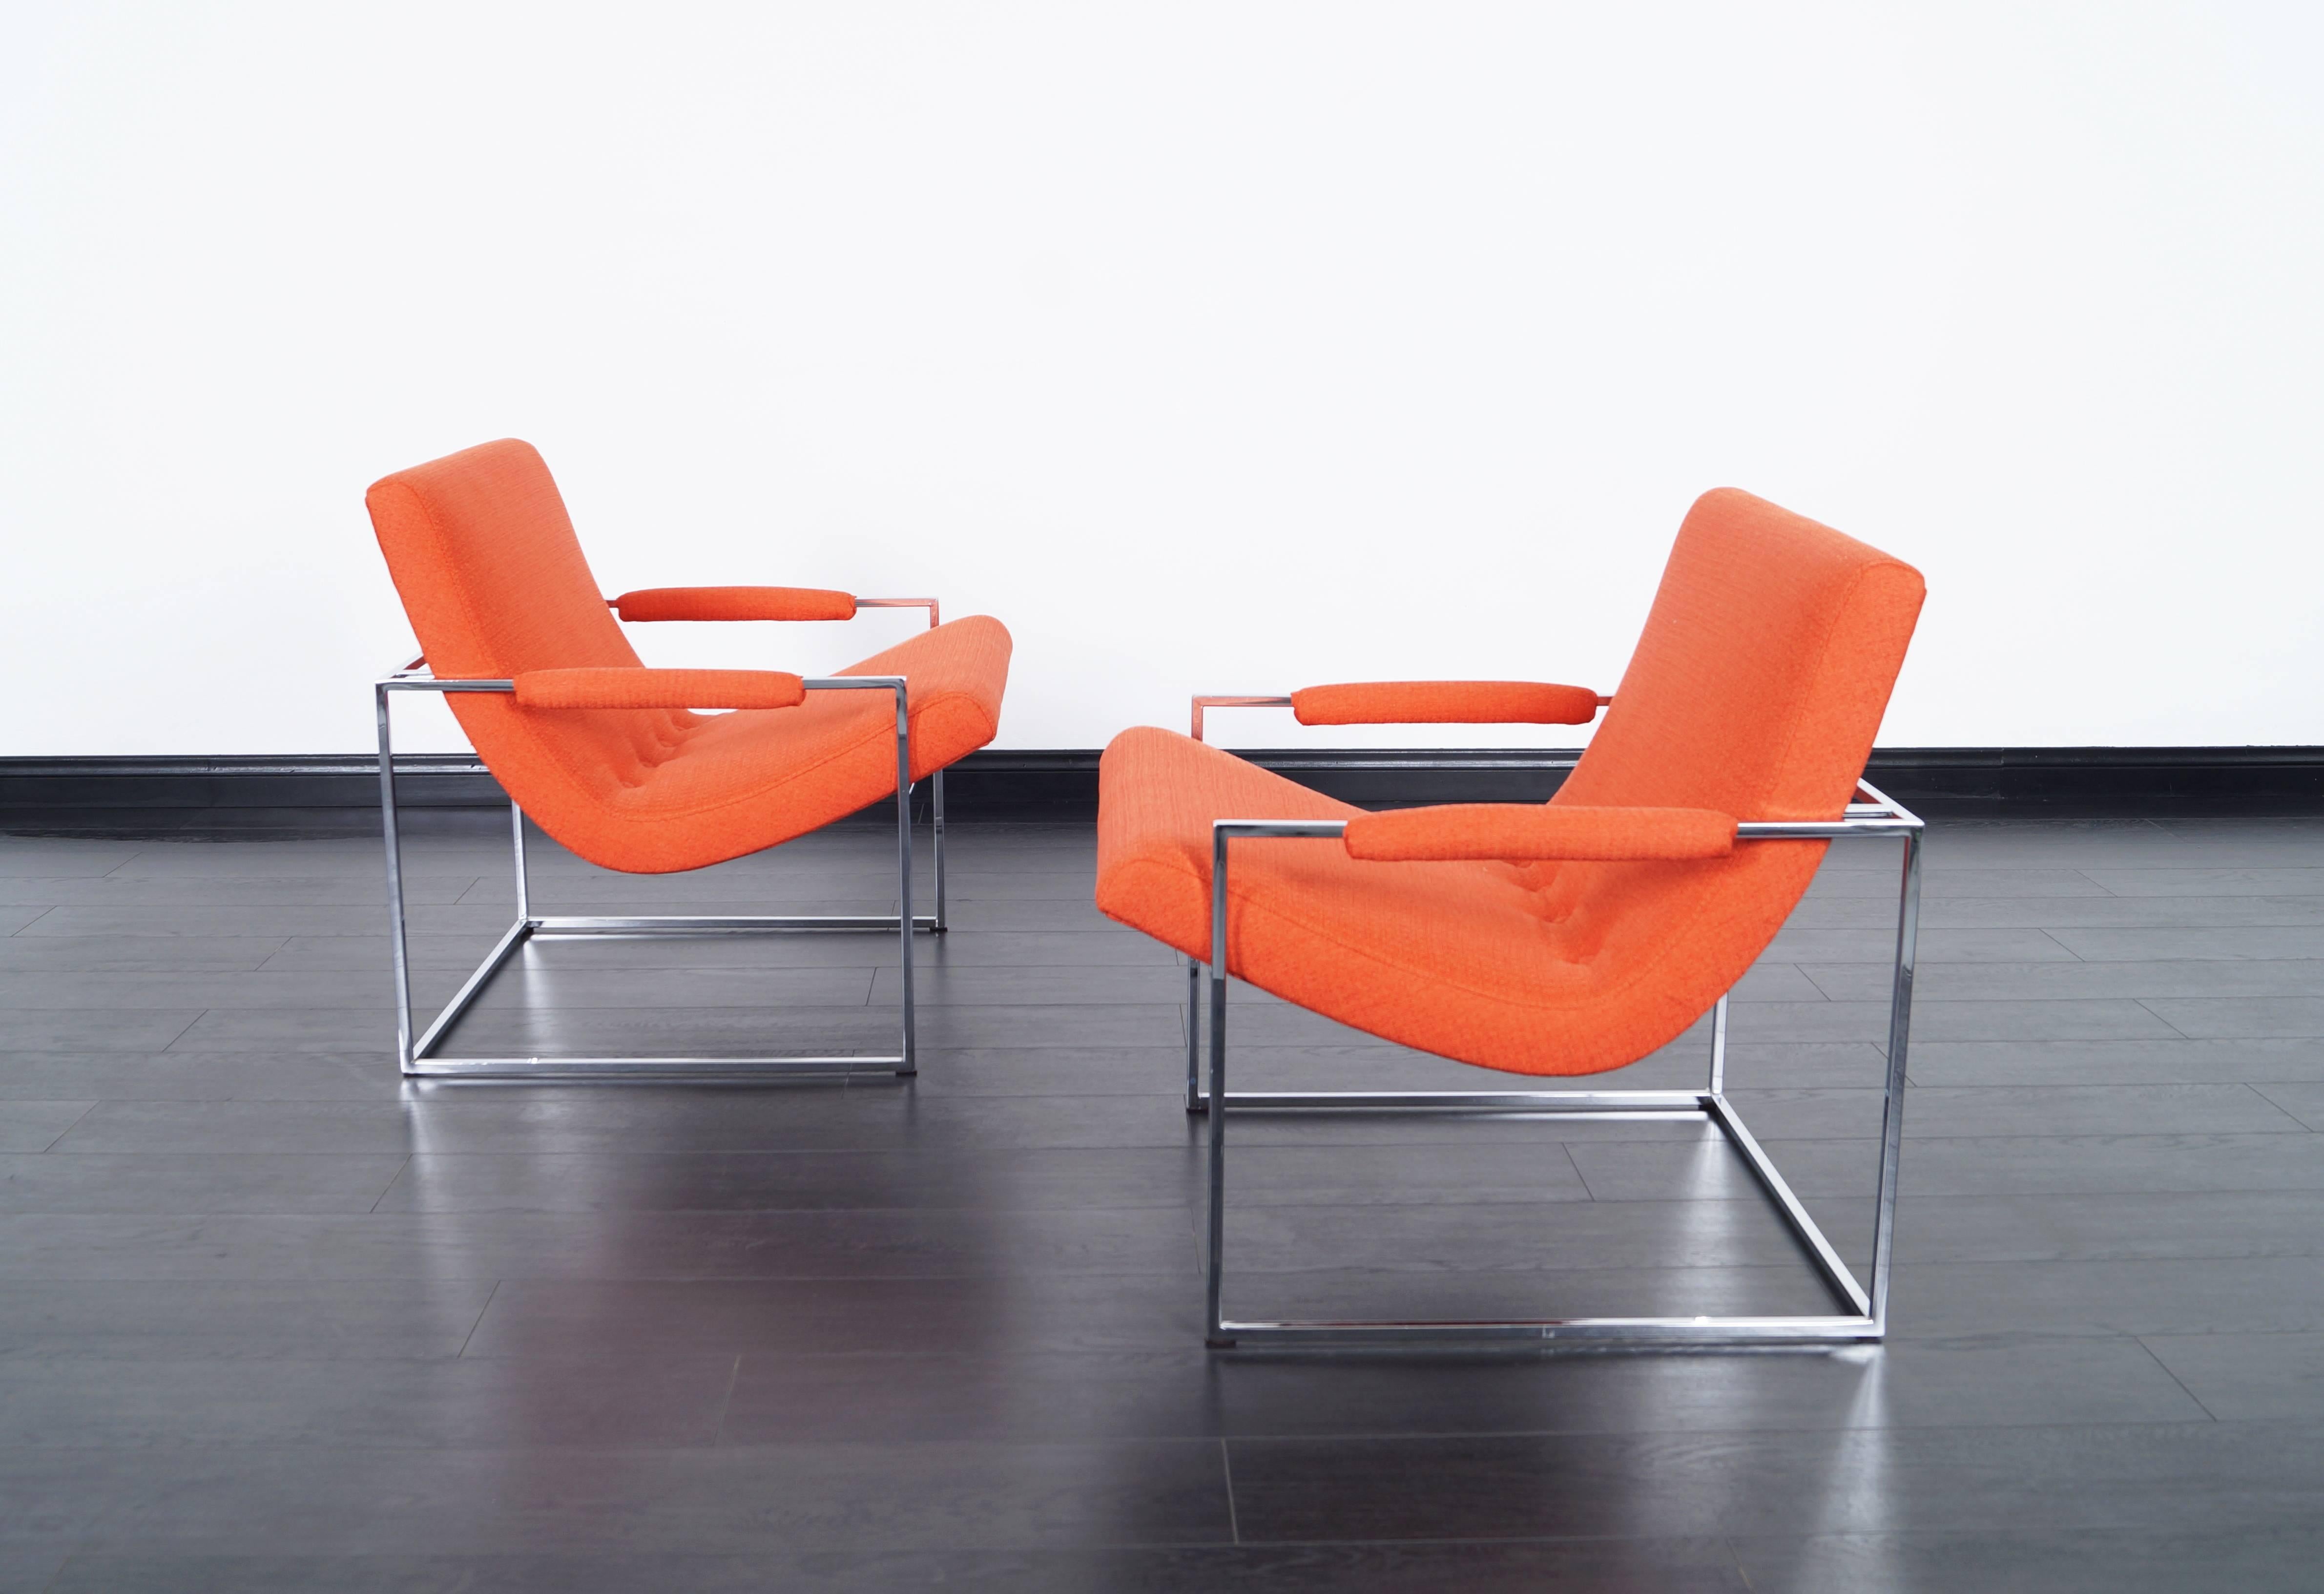 A pair of stunning chrome lounge chairs designed by Milo Baughman for Thayer Coggin.